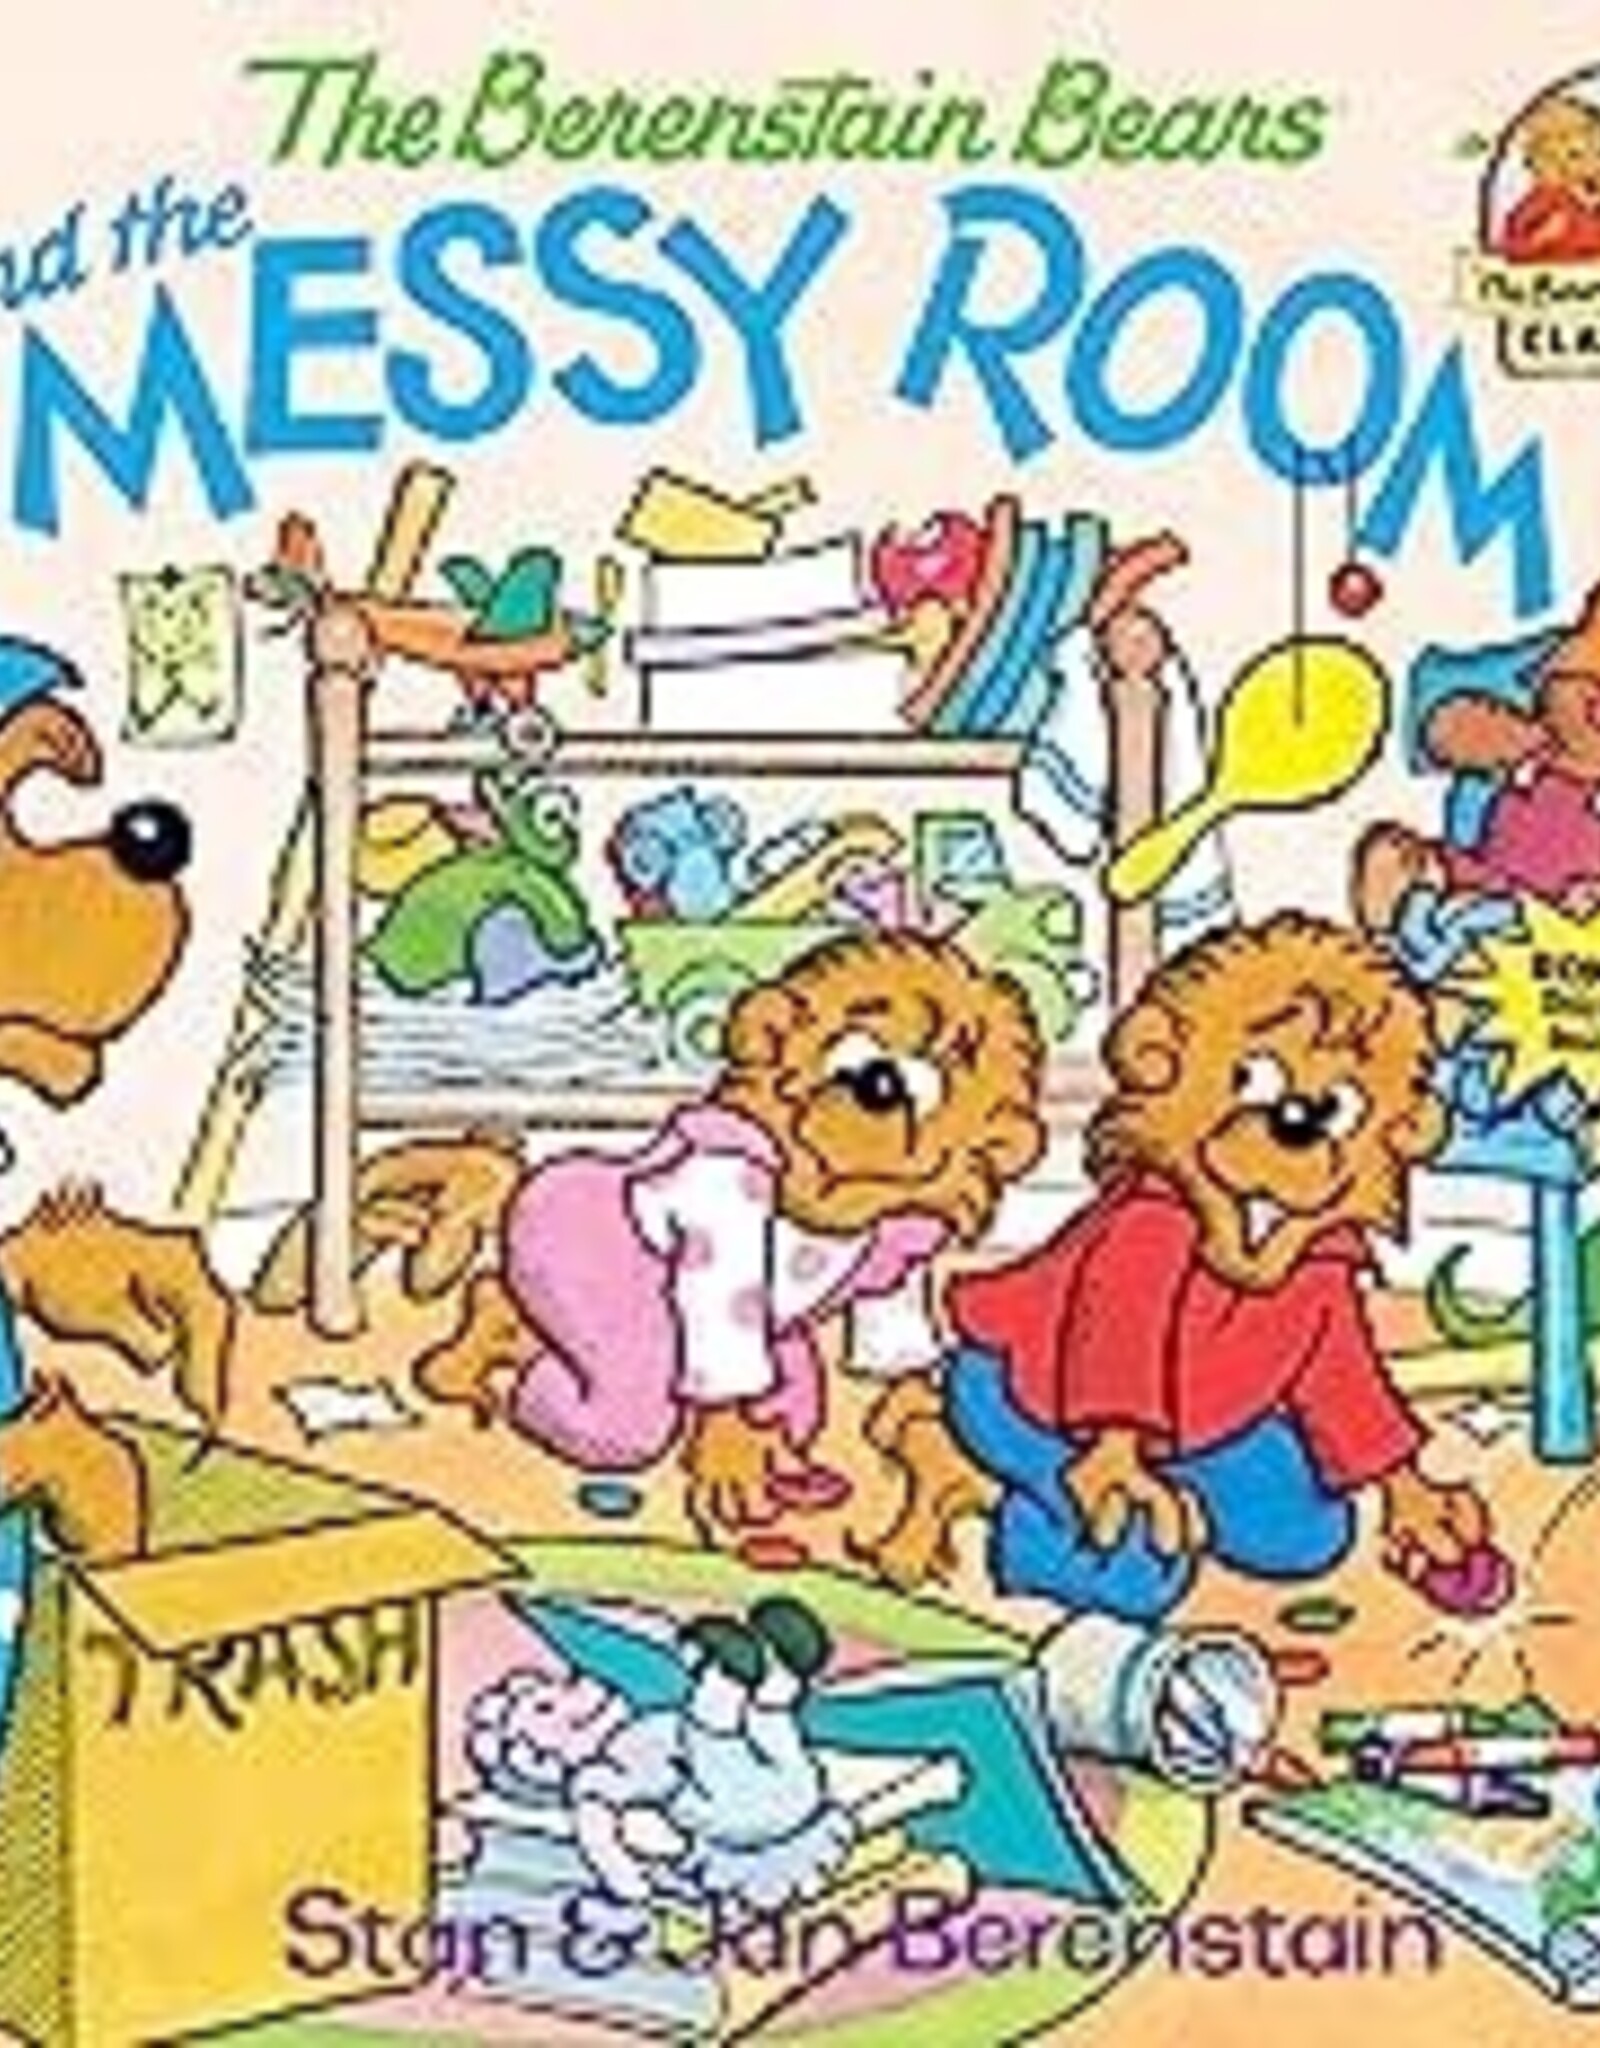 Penguin Random House PCT Berenstain Bears and the Messy Room